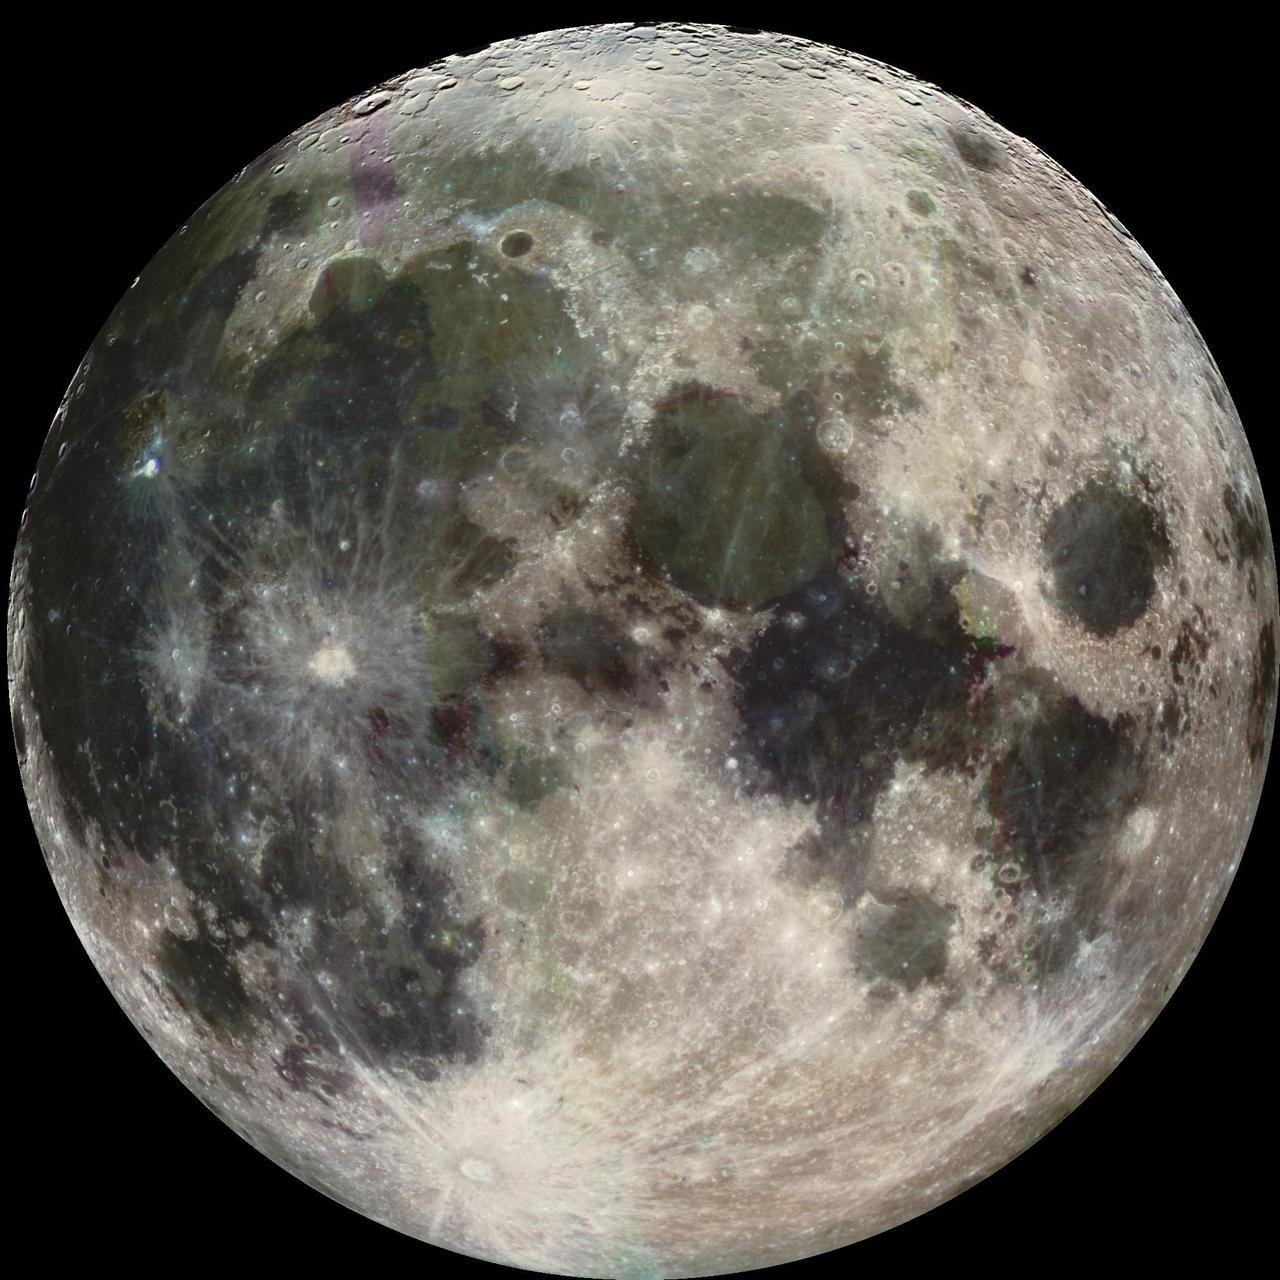 An image of a full moon, the side seen from Earth, against a black background